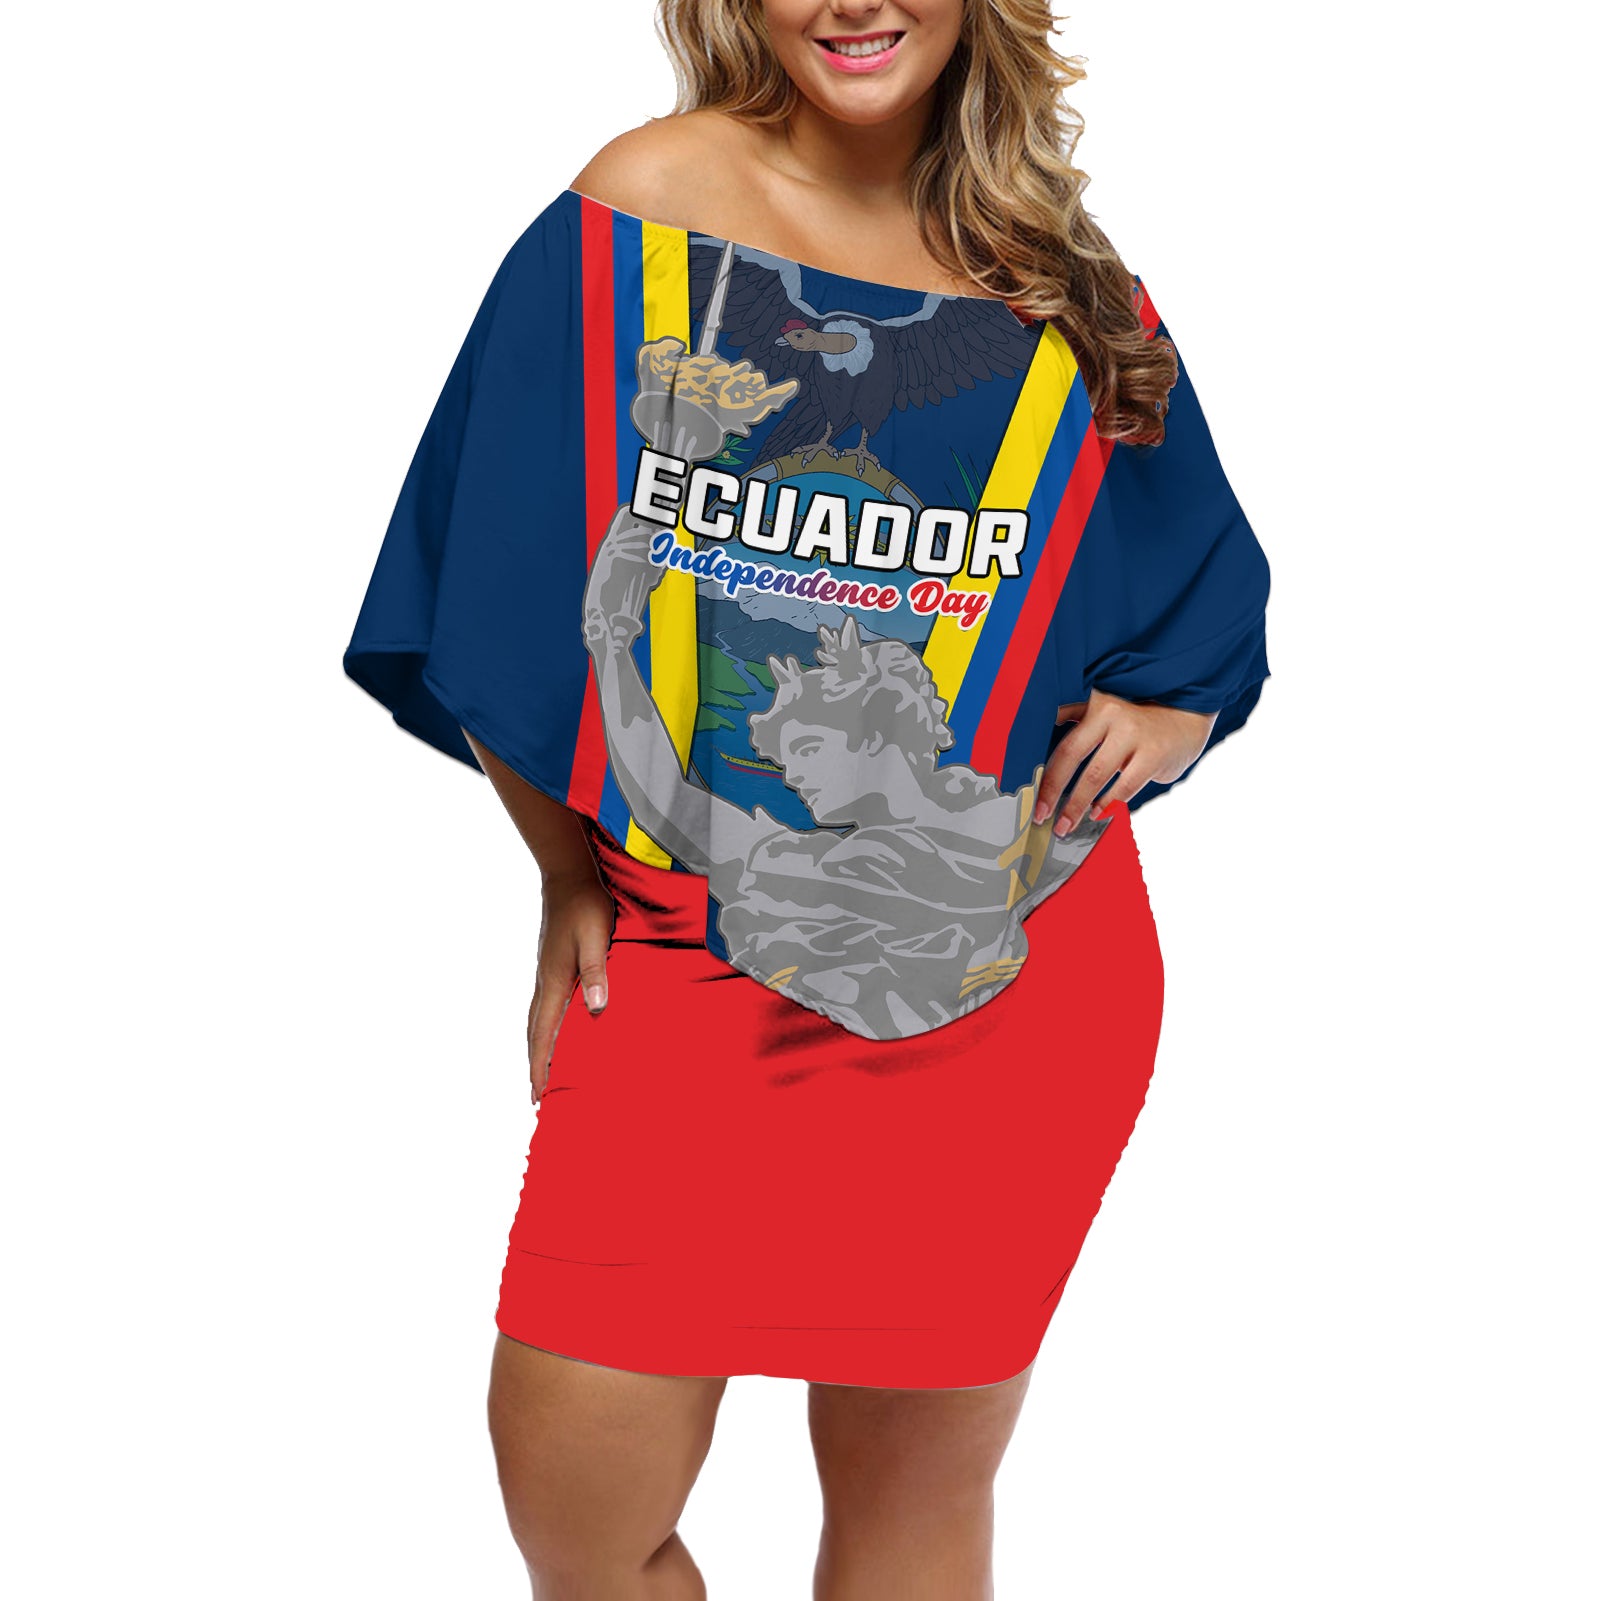 ecuador-independence-day-off-shoulder-short-dress-monumento-a-la-independencia-quito-10th-august